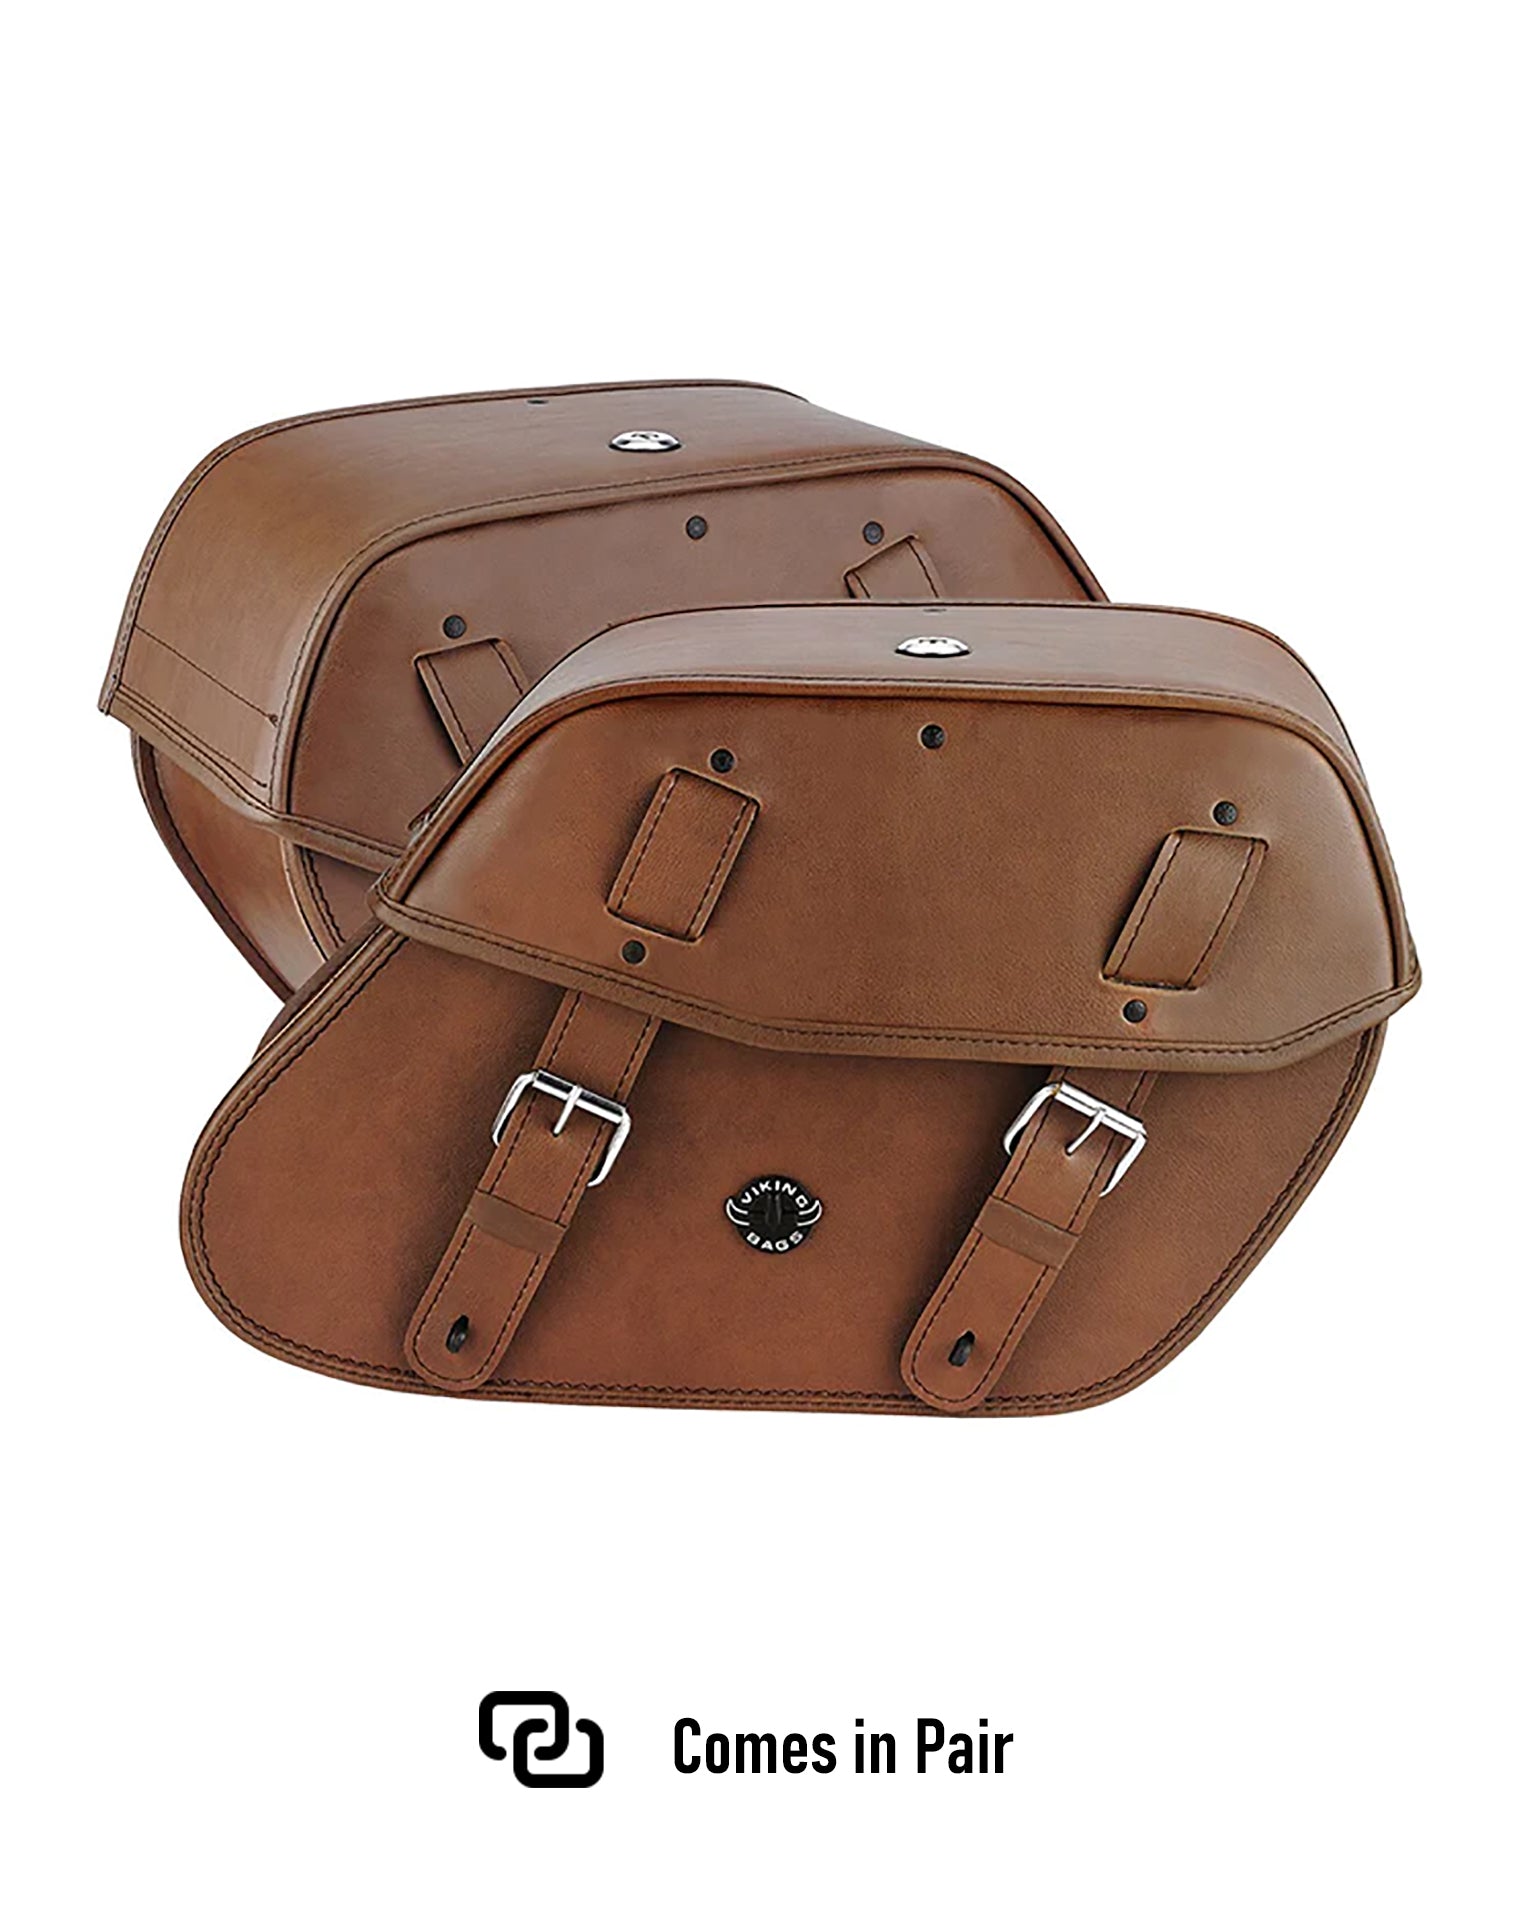 Viking Odin Brown Large Leather Motorcycle Saddlebags For Harley Softail Springer Fxsts I Weather Resistant Bags Comes in Pair